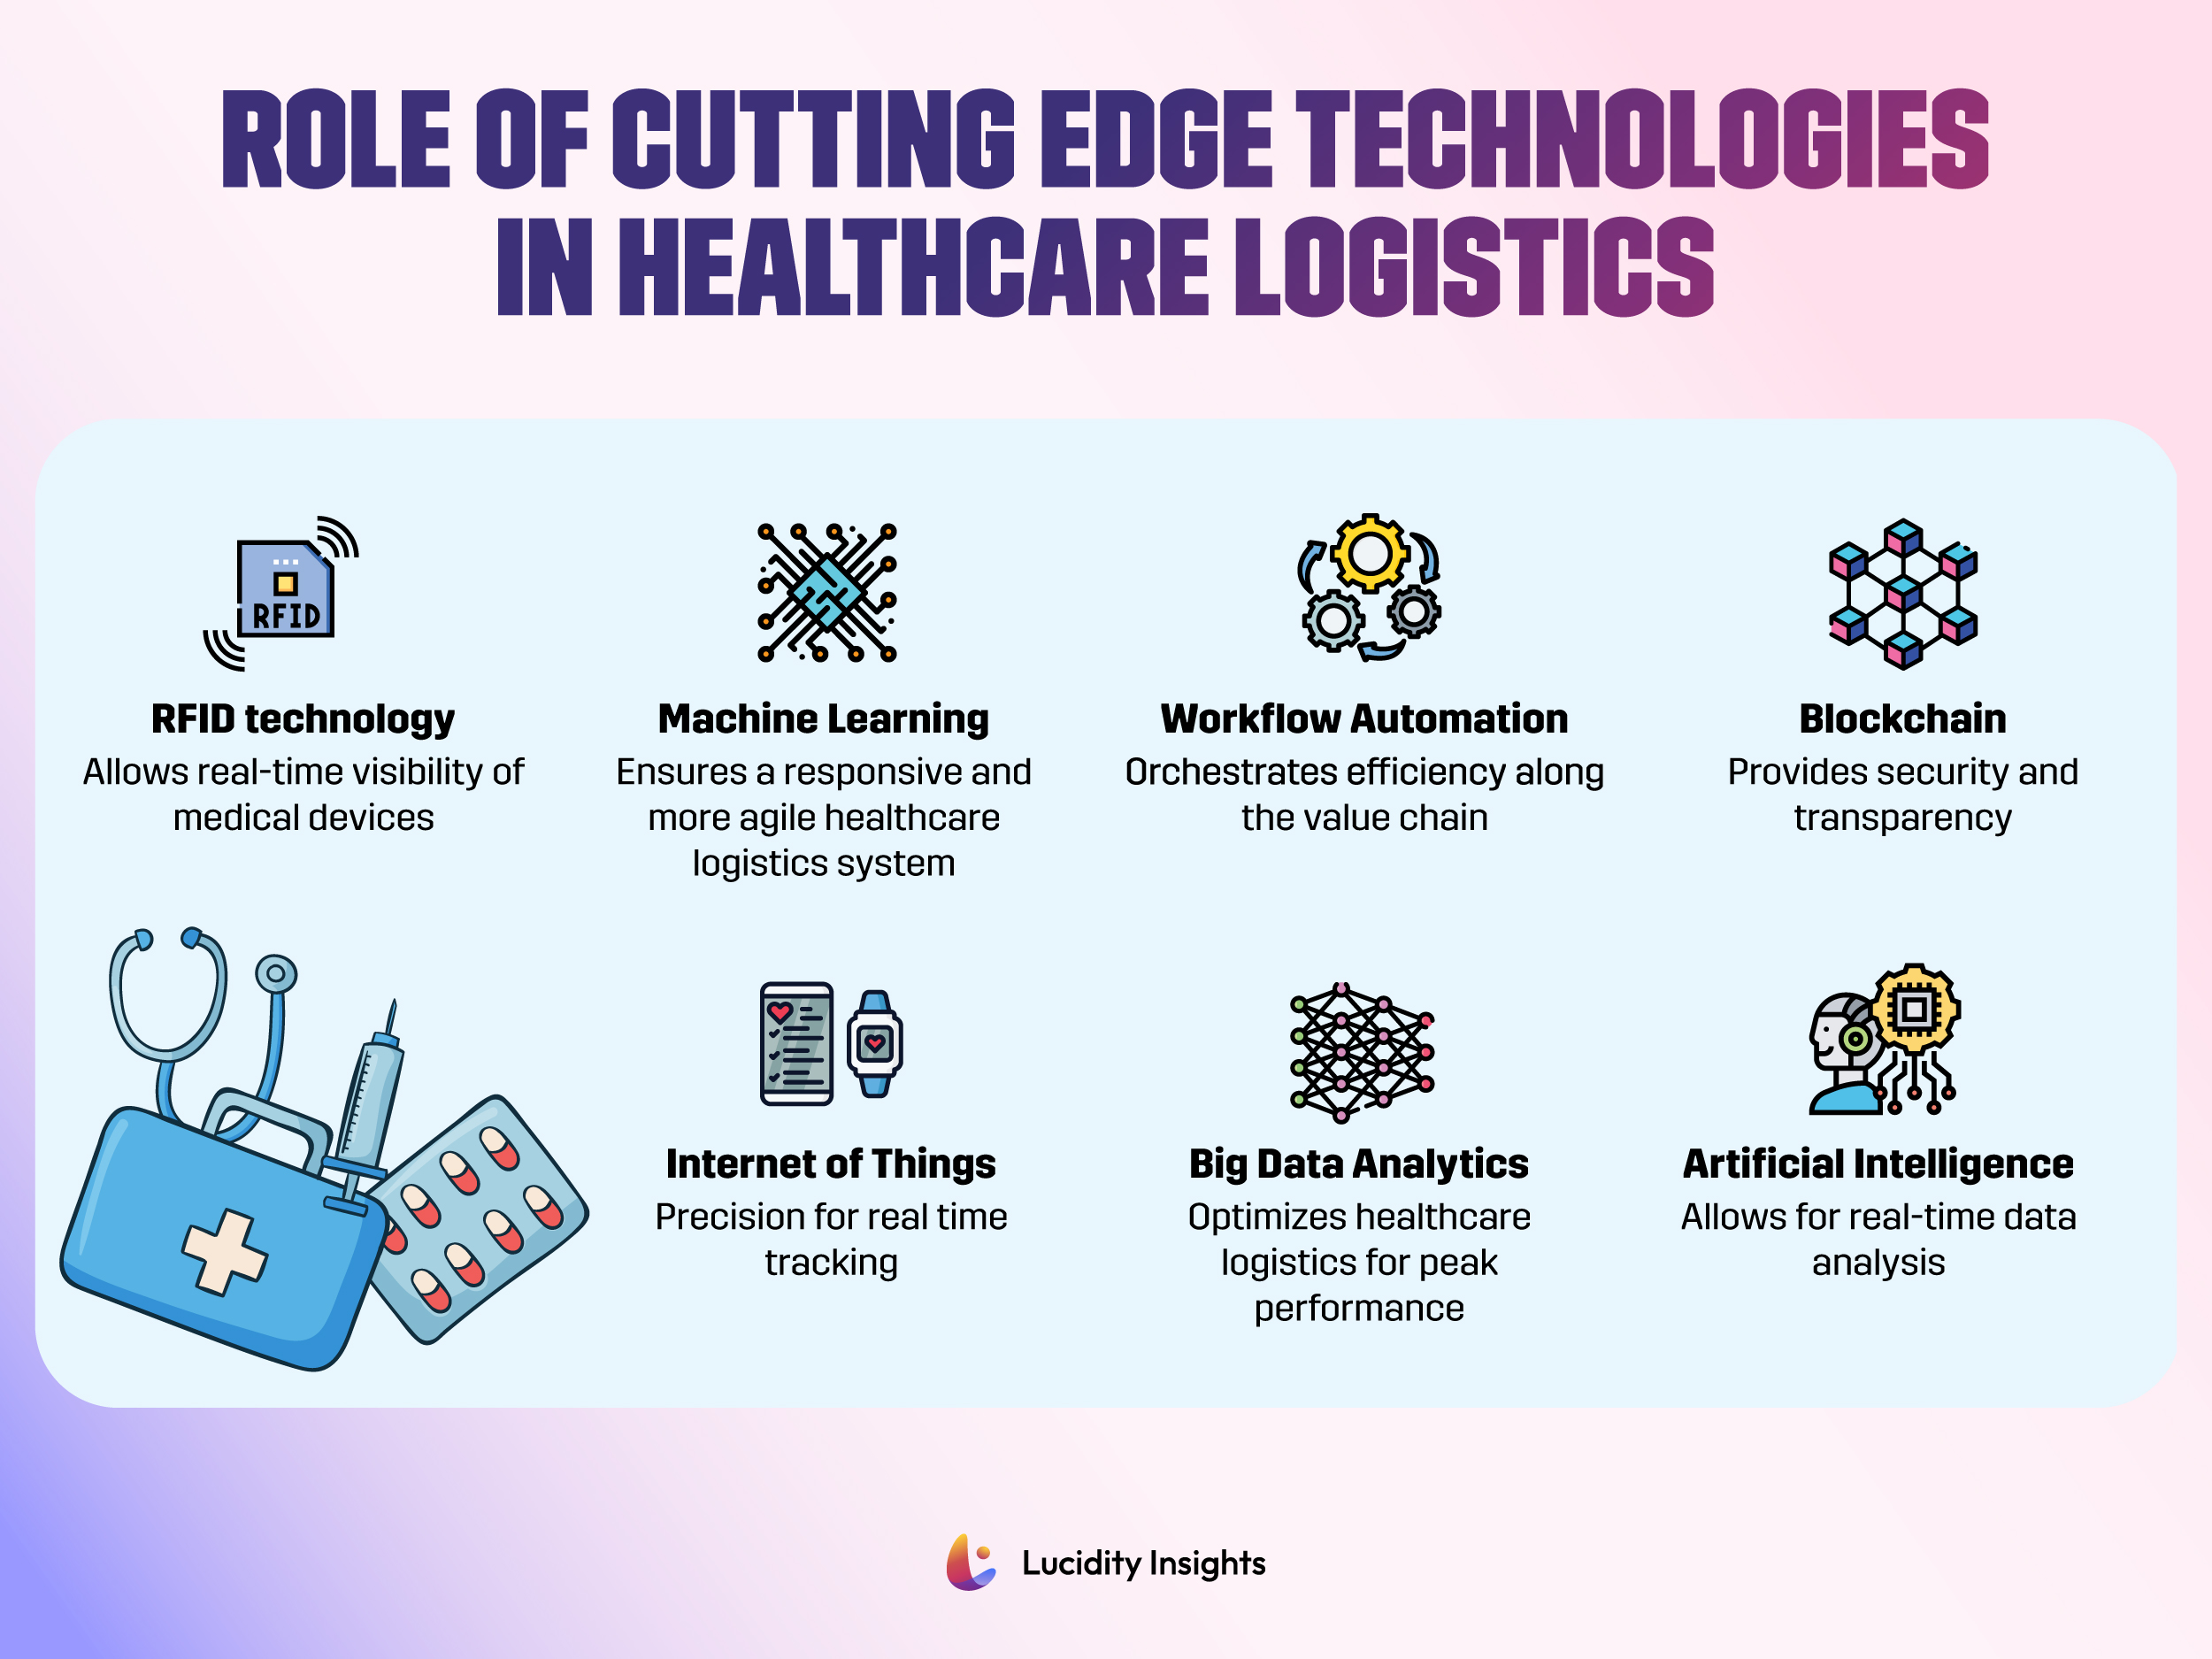 Role of Cutting Edge Technologies in Healthcare Logistics